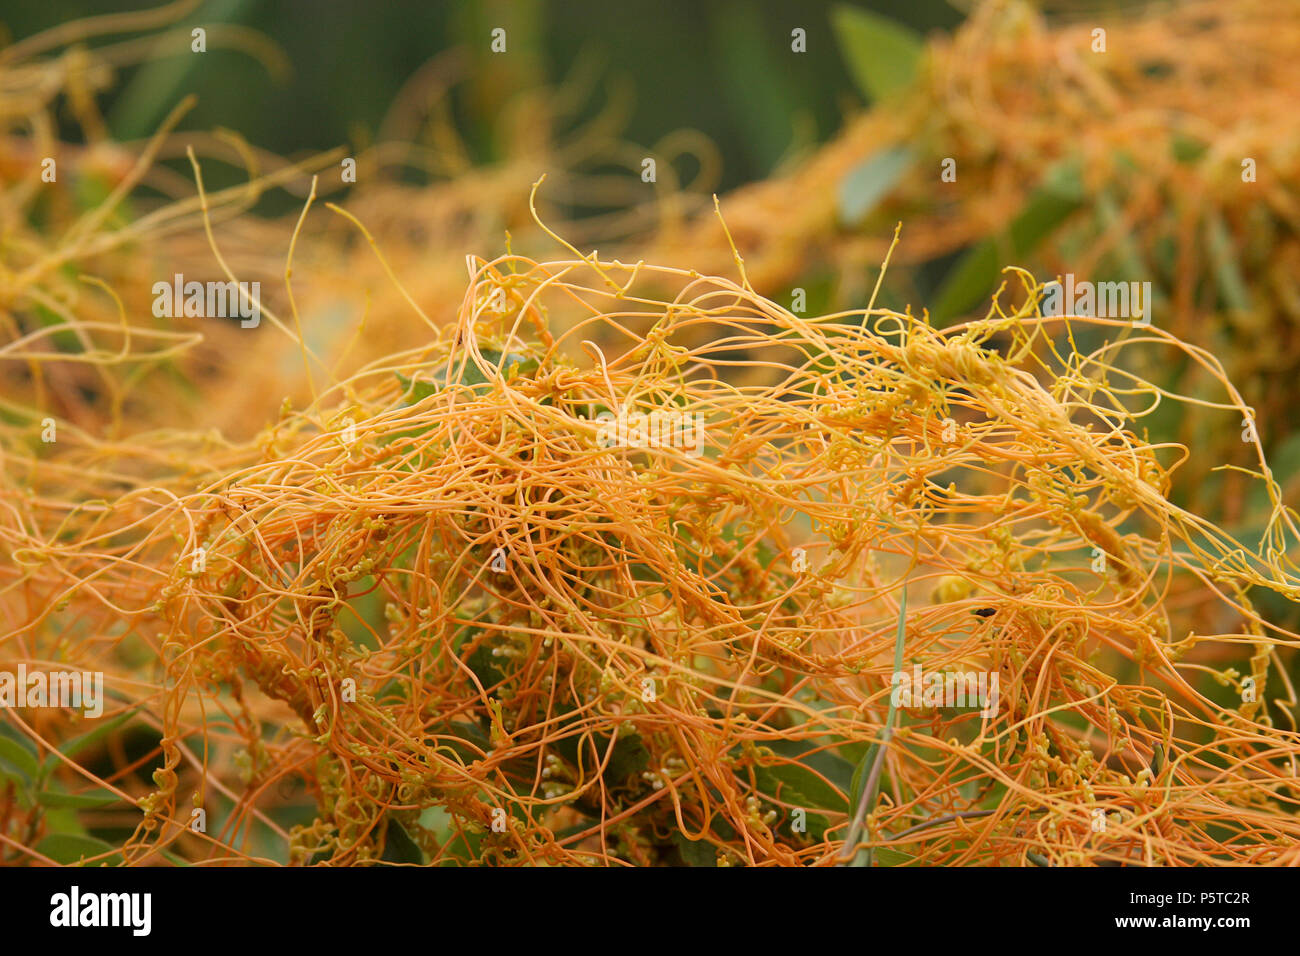 Cuscuta (dodder) plant wrapped around other plants Stock Photo